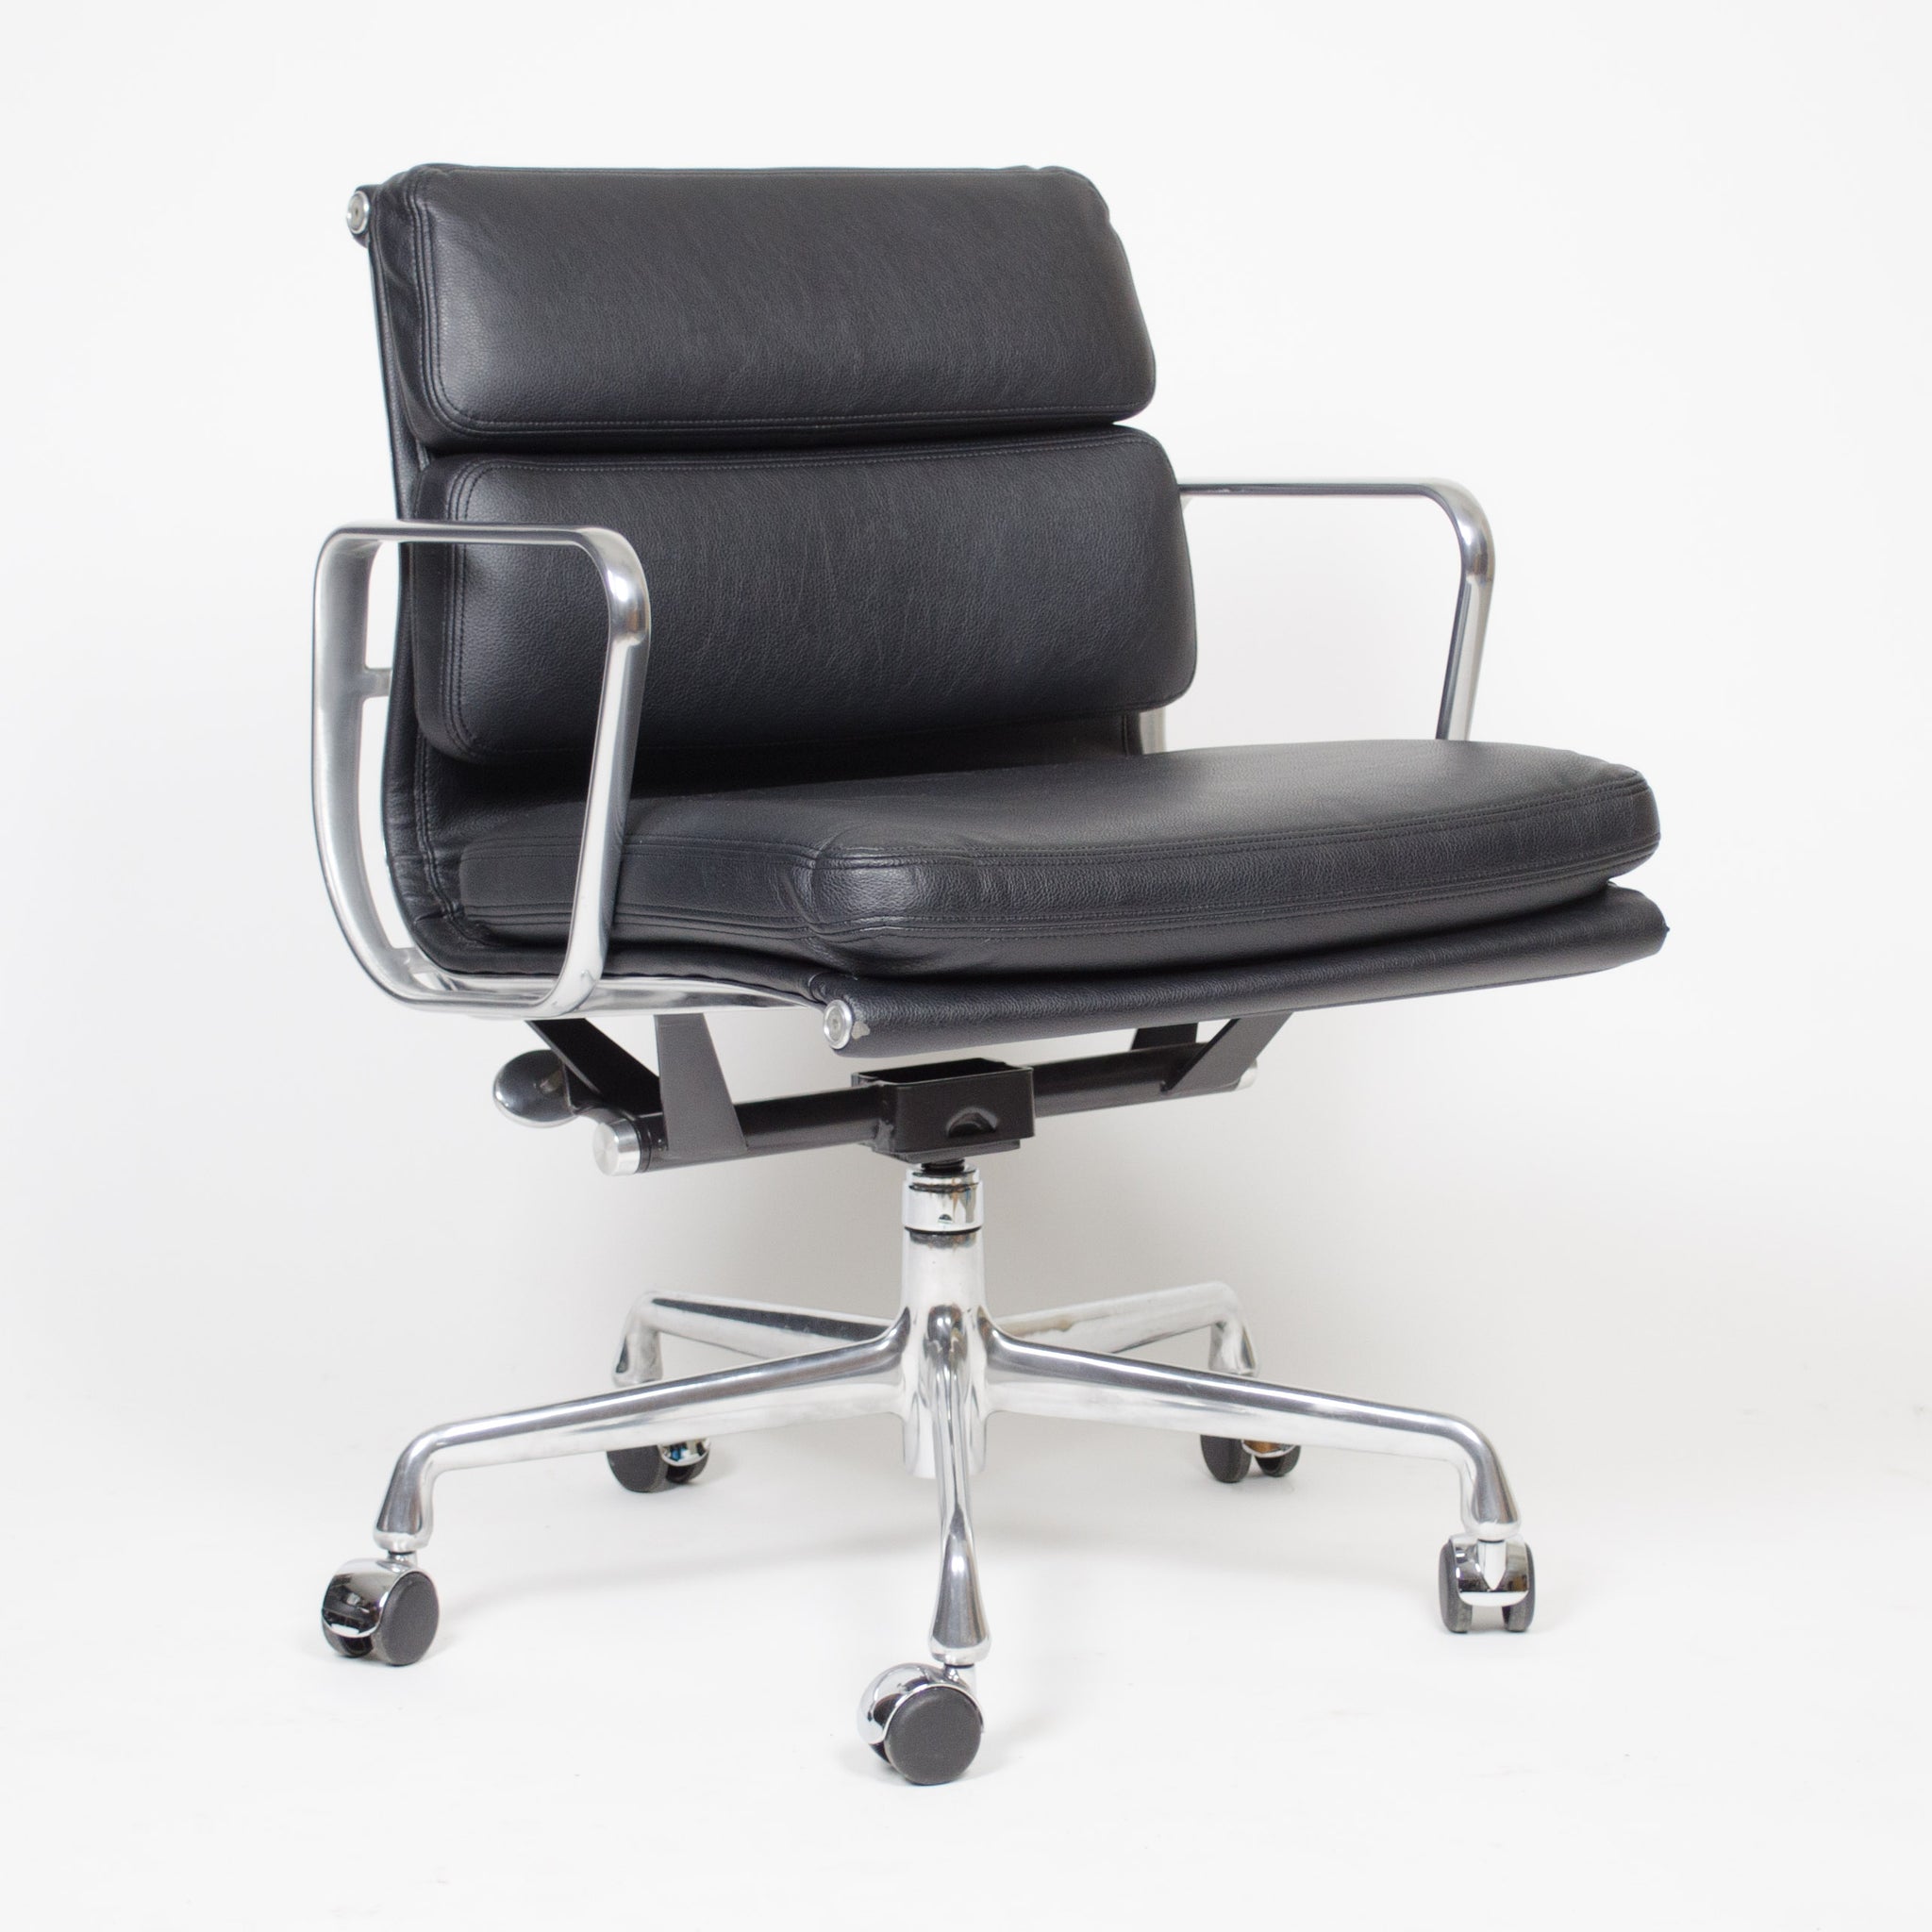 SOLD Eames Herman Miller Soft Pad Aluminum Group Chair Black Leather 4+ Avail MINT!